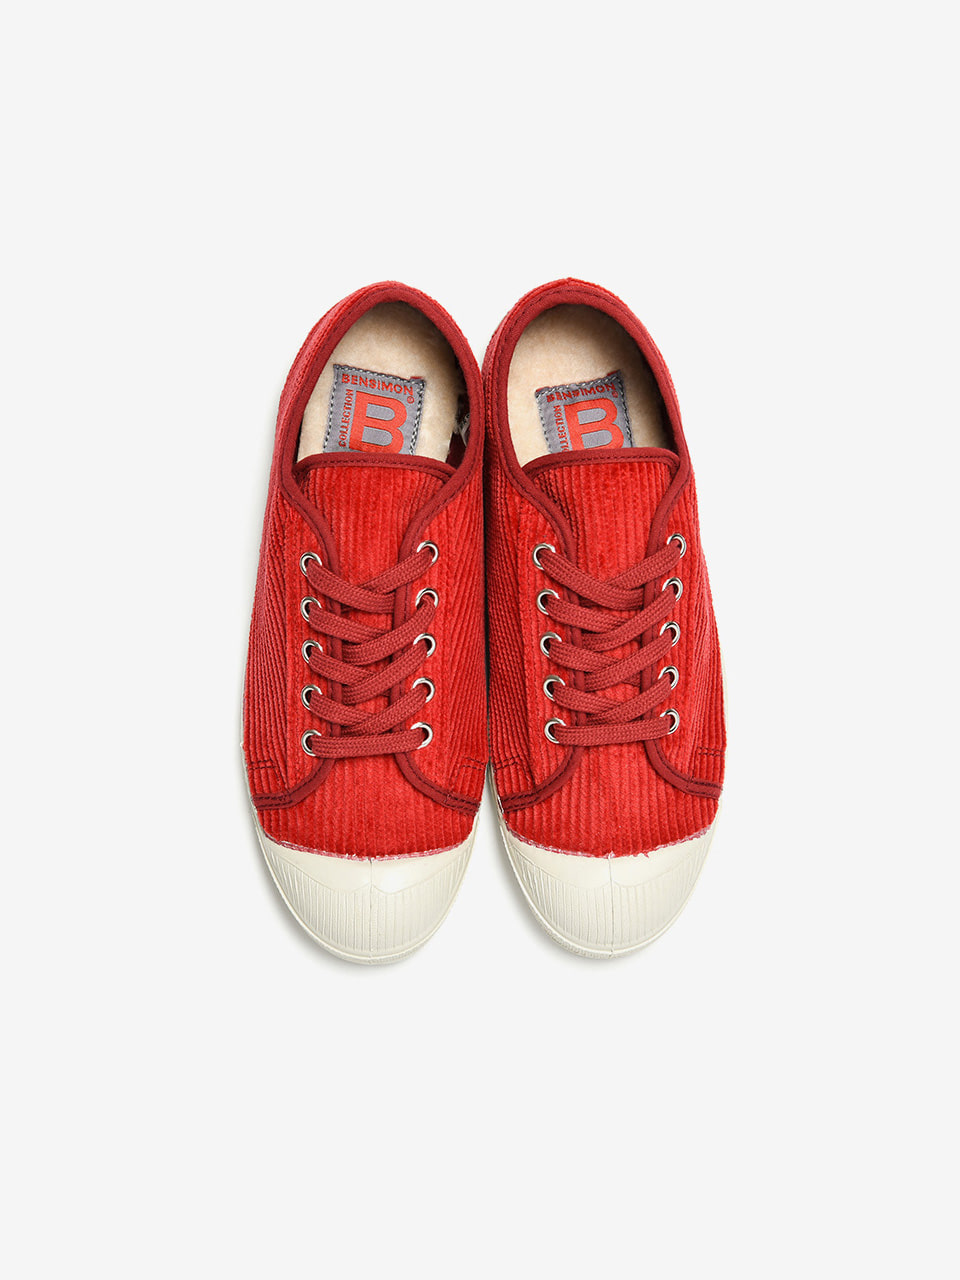 LIMITED ROMY CORDUROY - RED